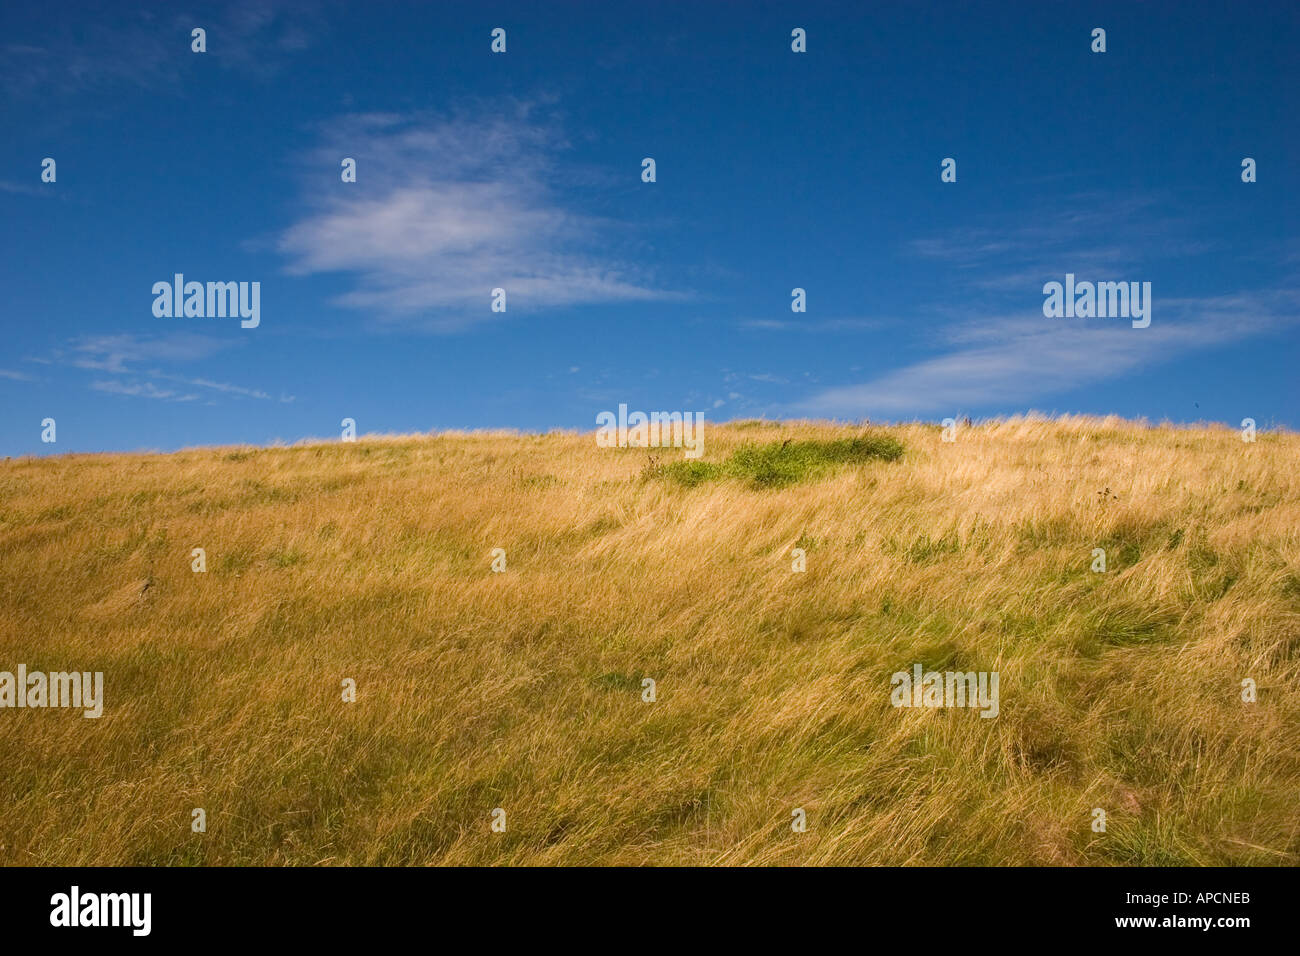 Grassy hill with blue sky Stock Photo